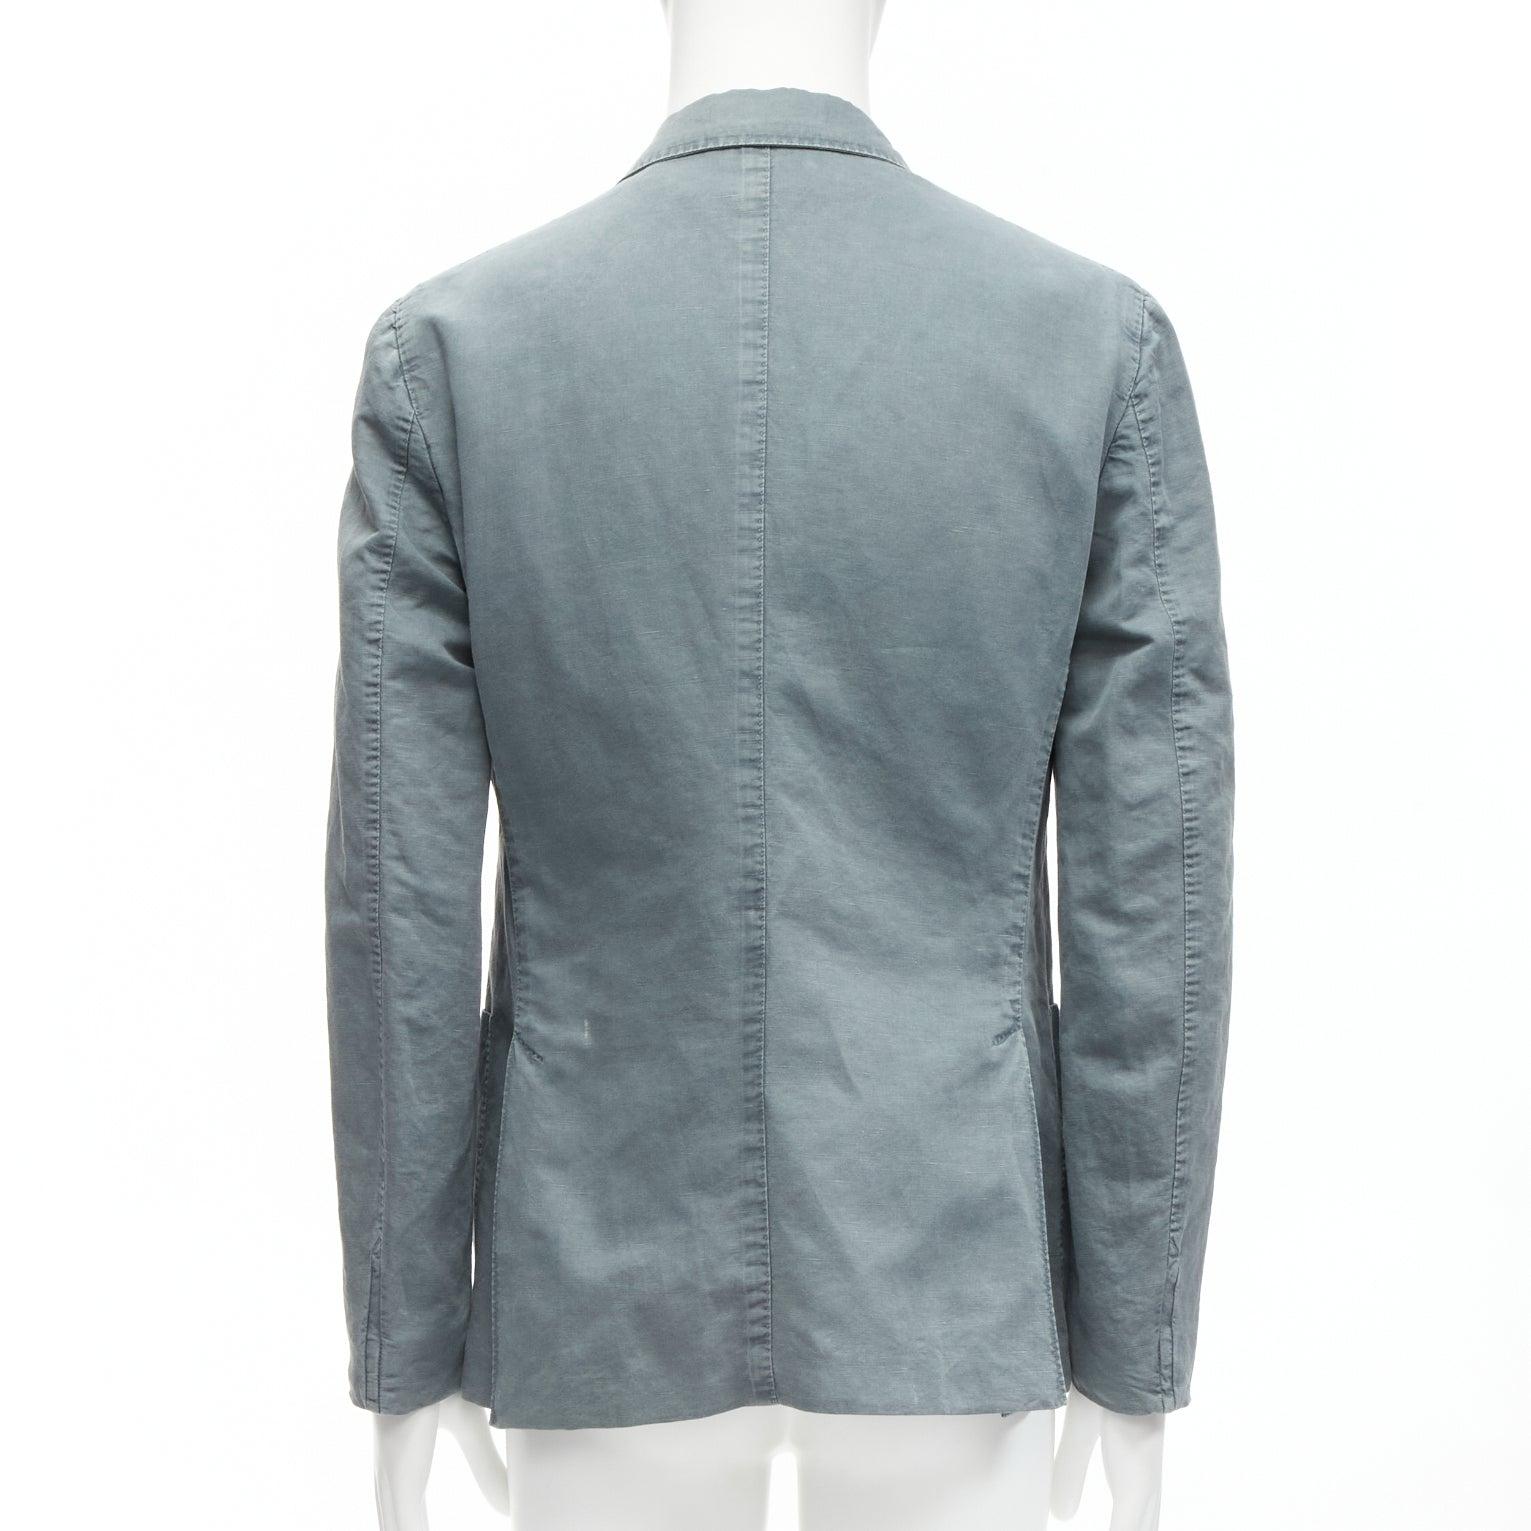  new Z ZEGNA green grey washed linen cotton 3 button pocket fitted blazer L Pour hommes 